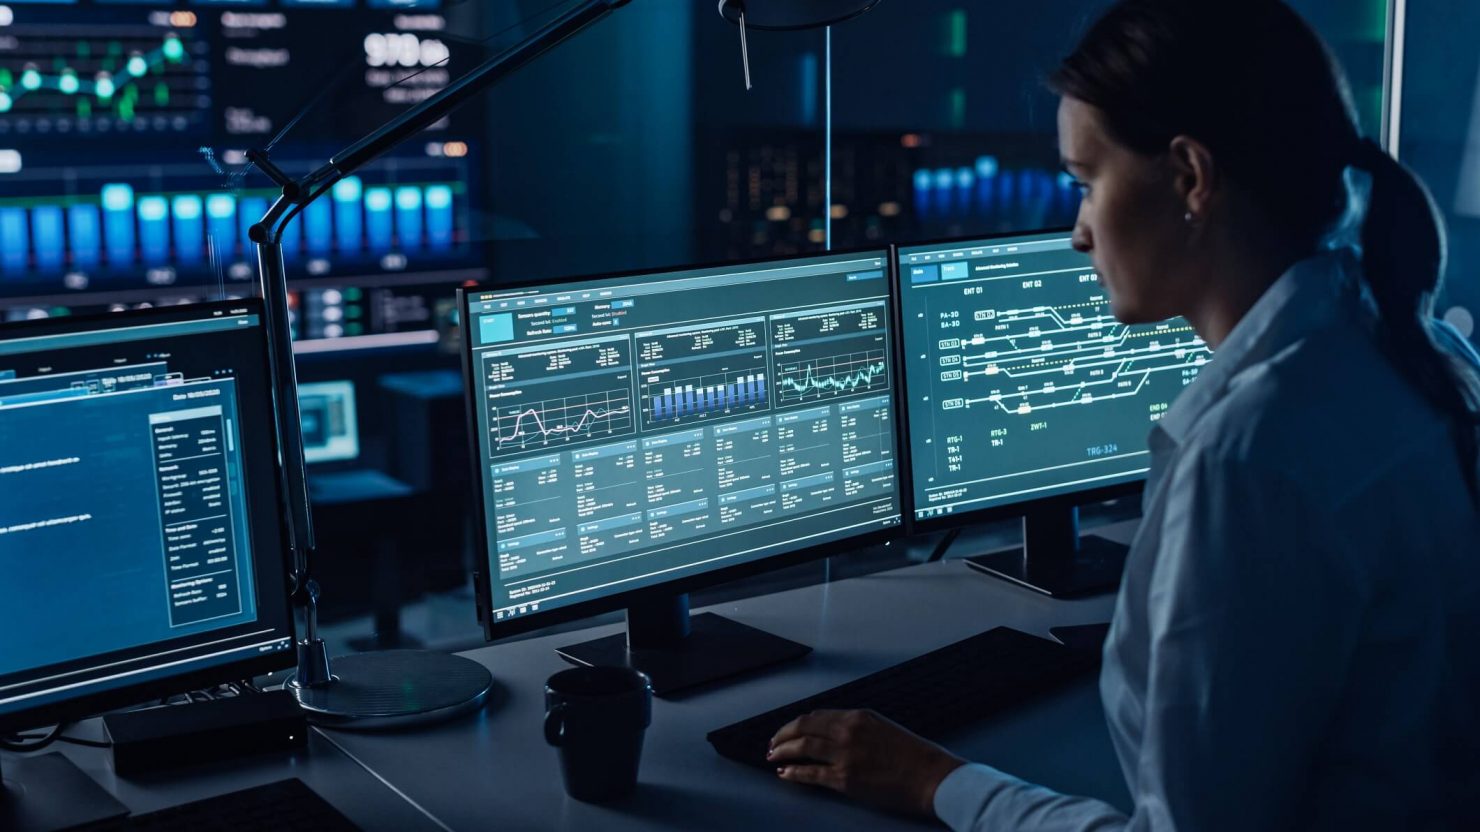 Photo of a woman looking at cybersecurity data on multiple computer monitors (credit: Shutterstock)